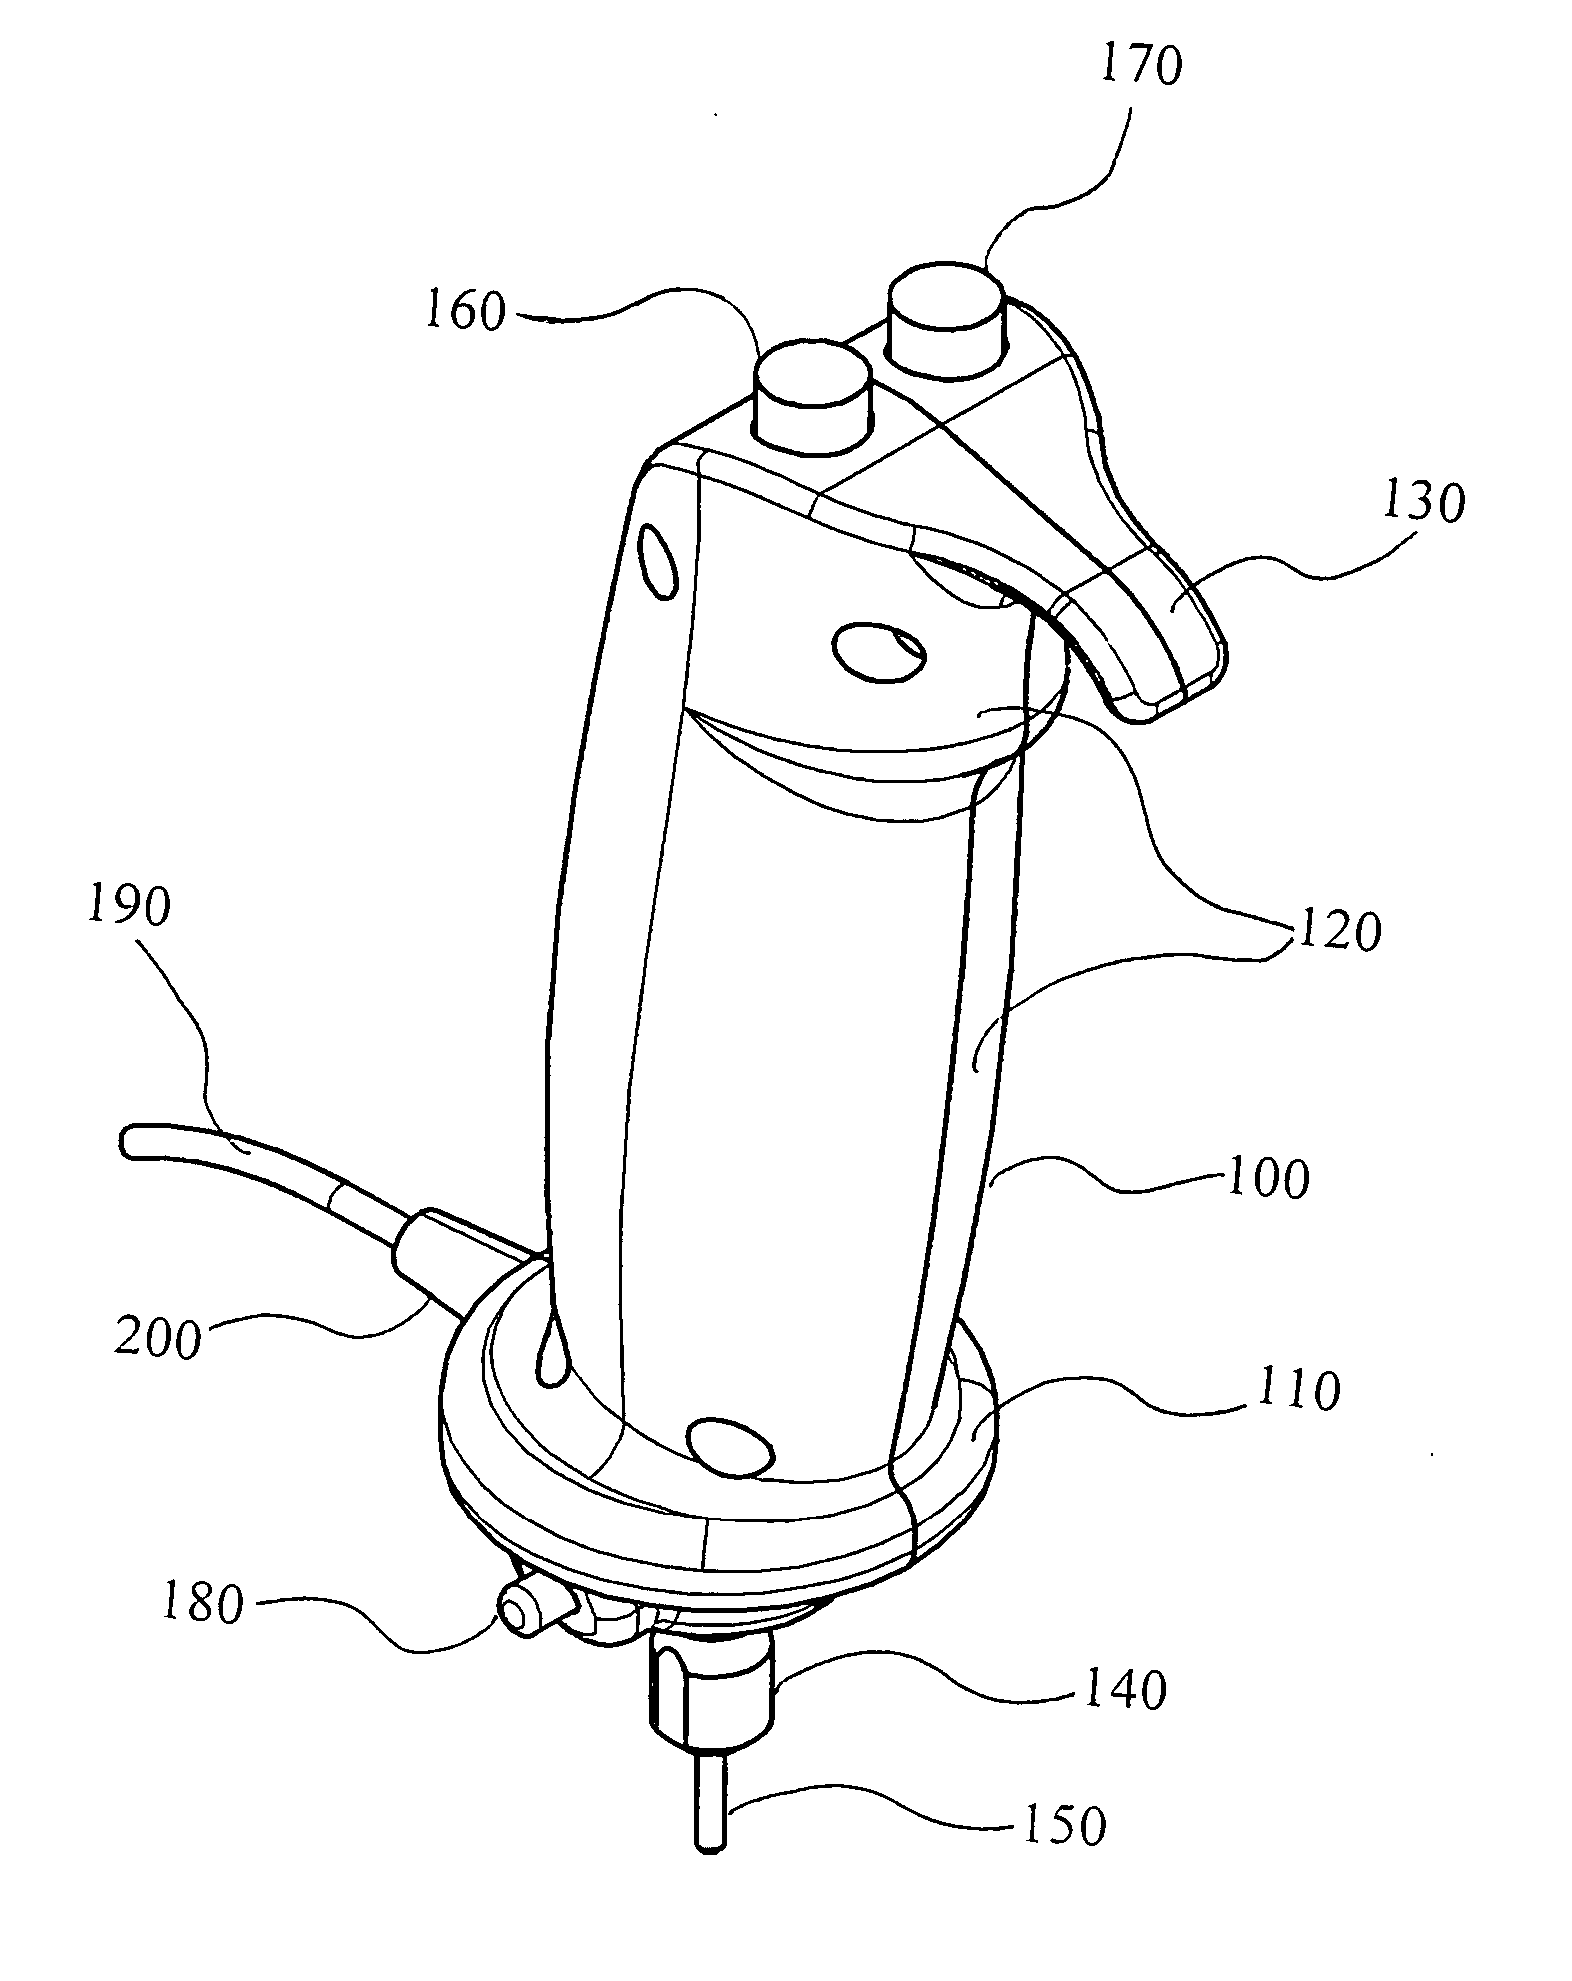 Motor driven sampling apparatus for material collection